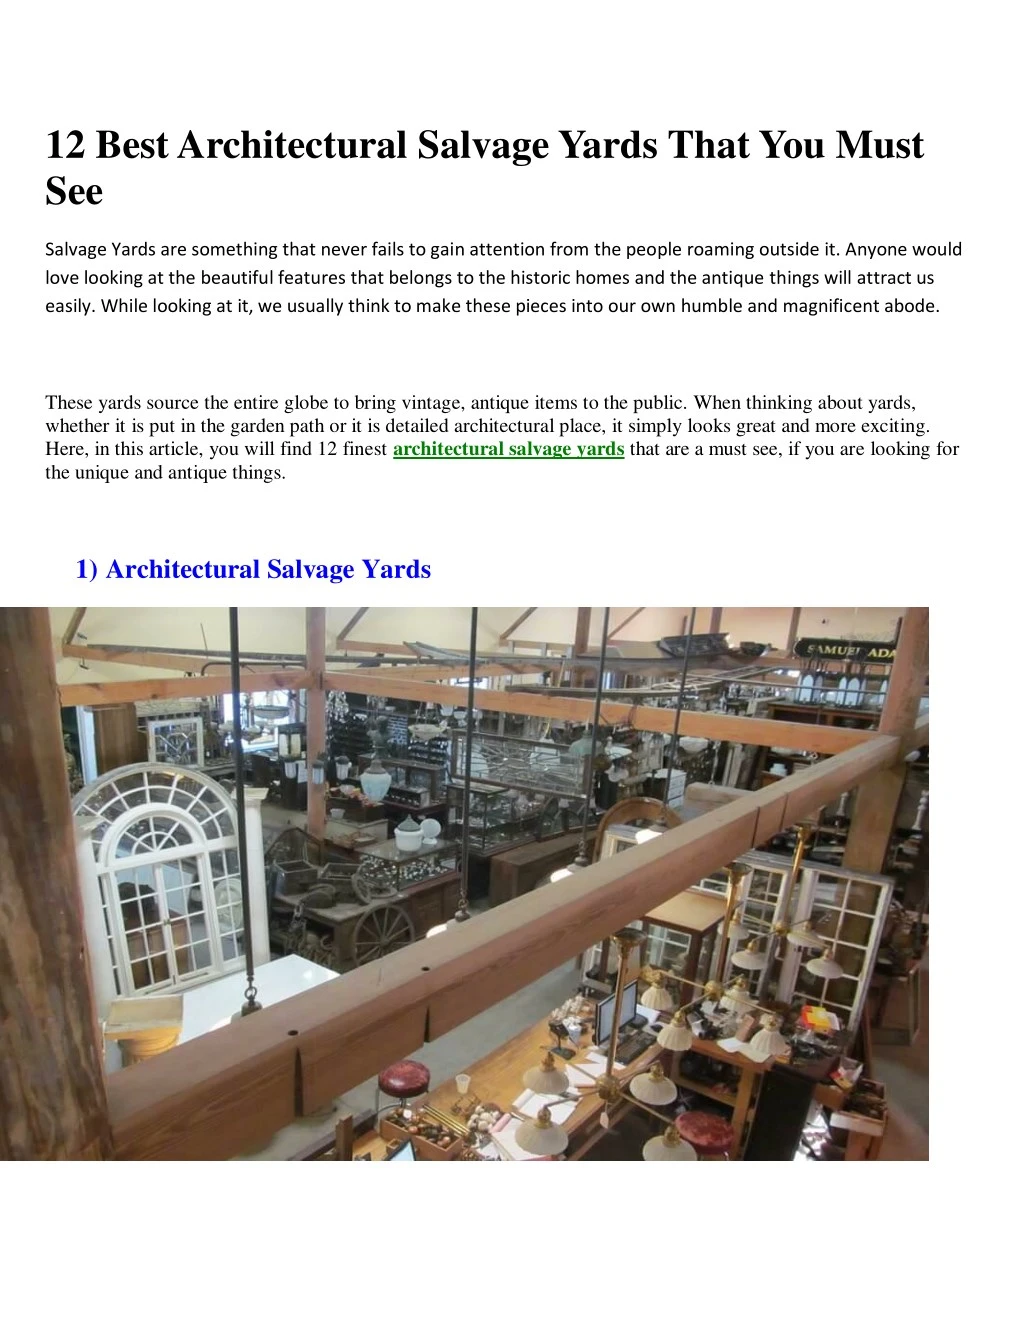 12 best architectural salvage yards that you must